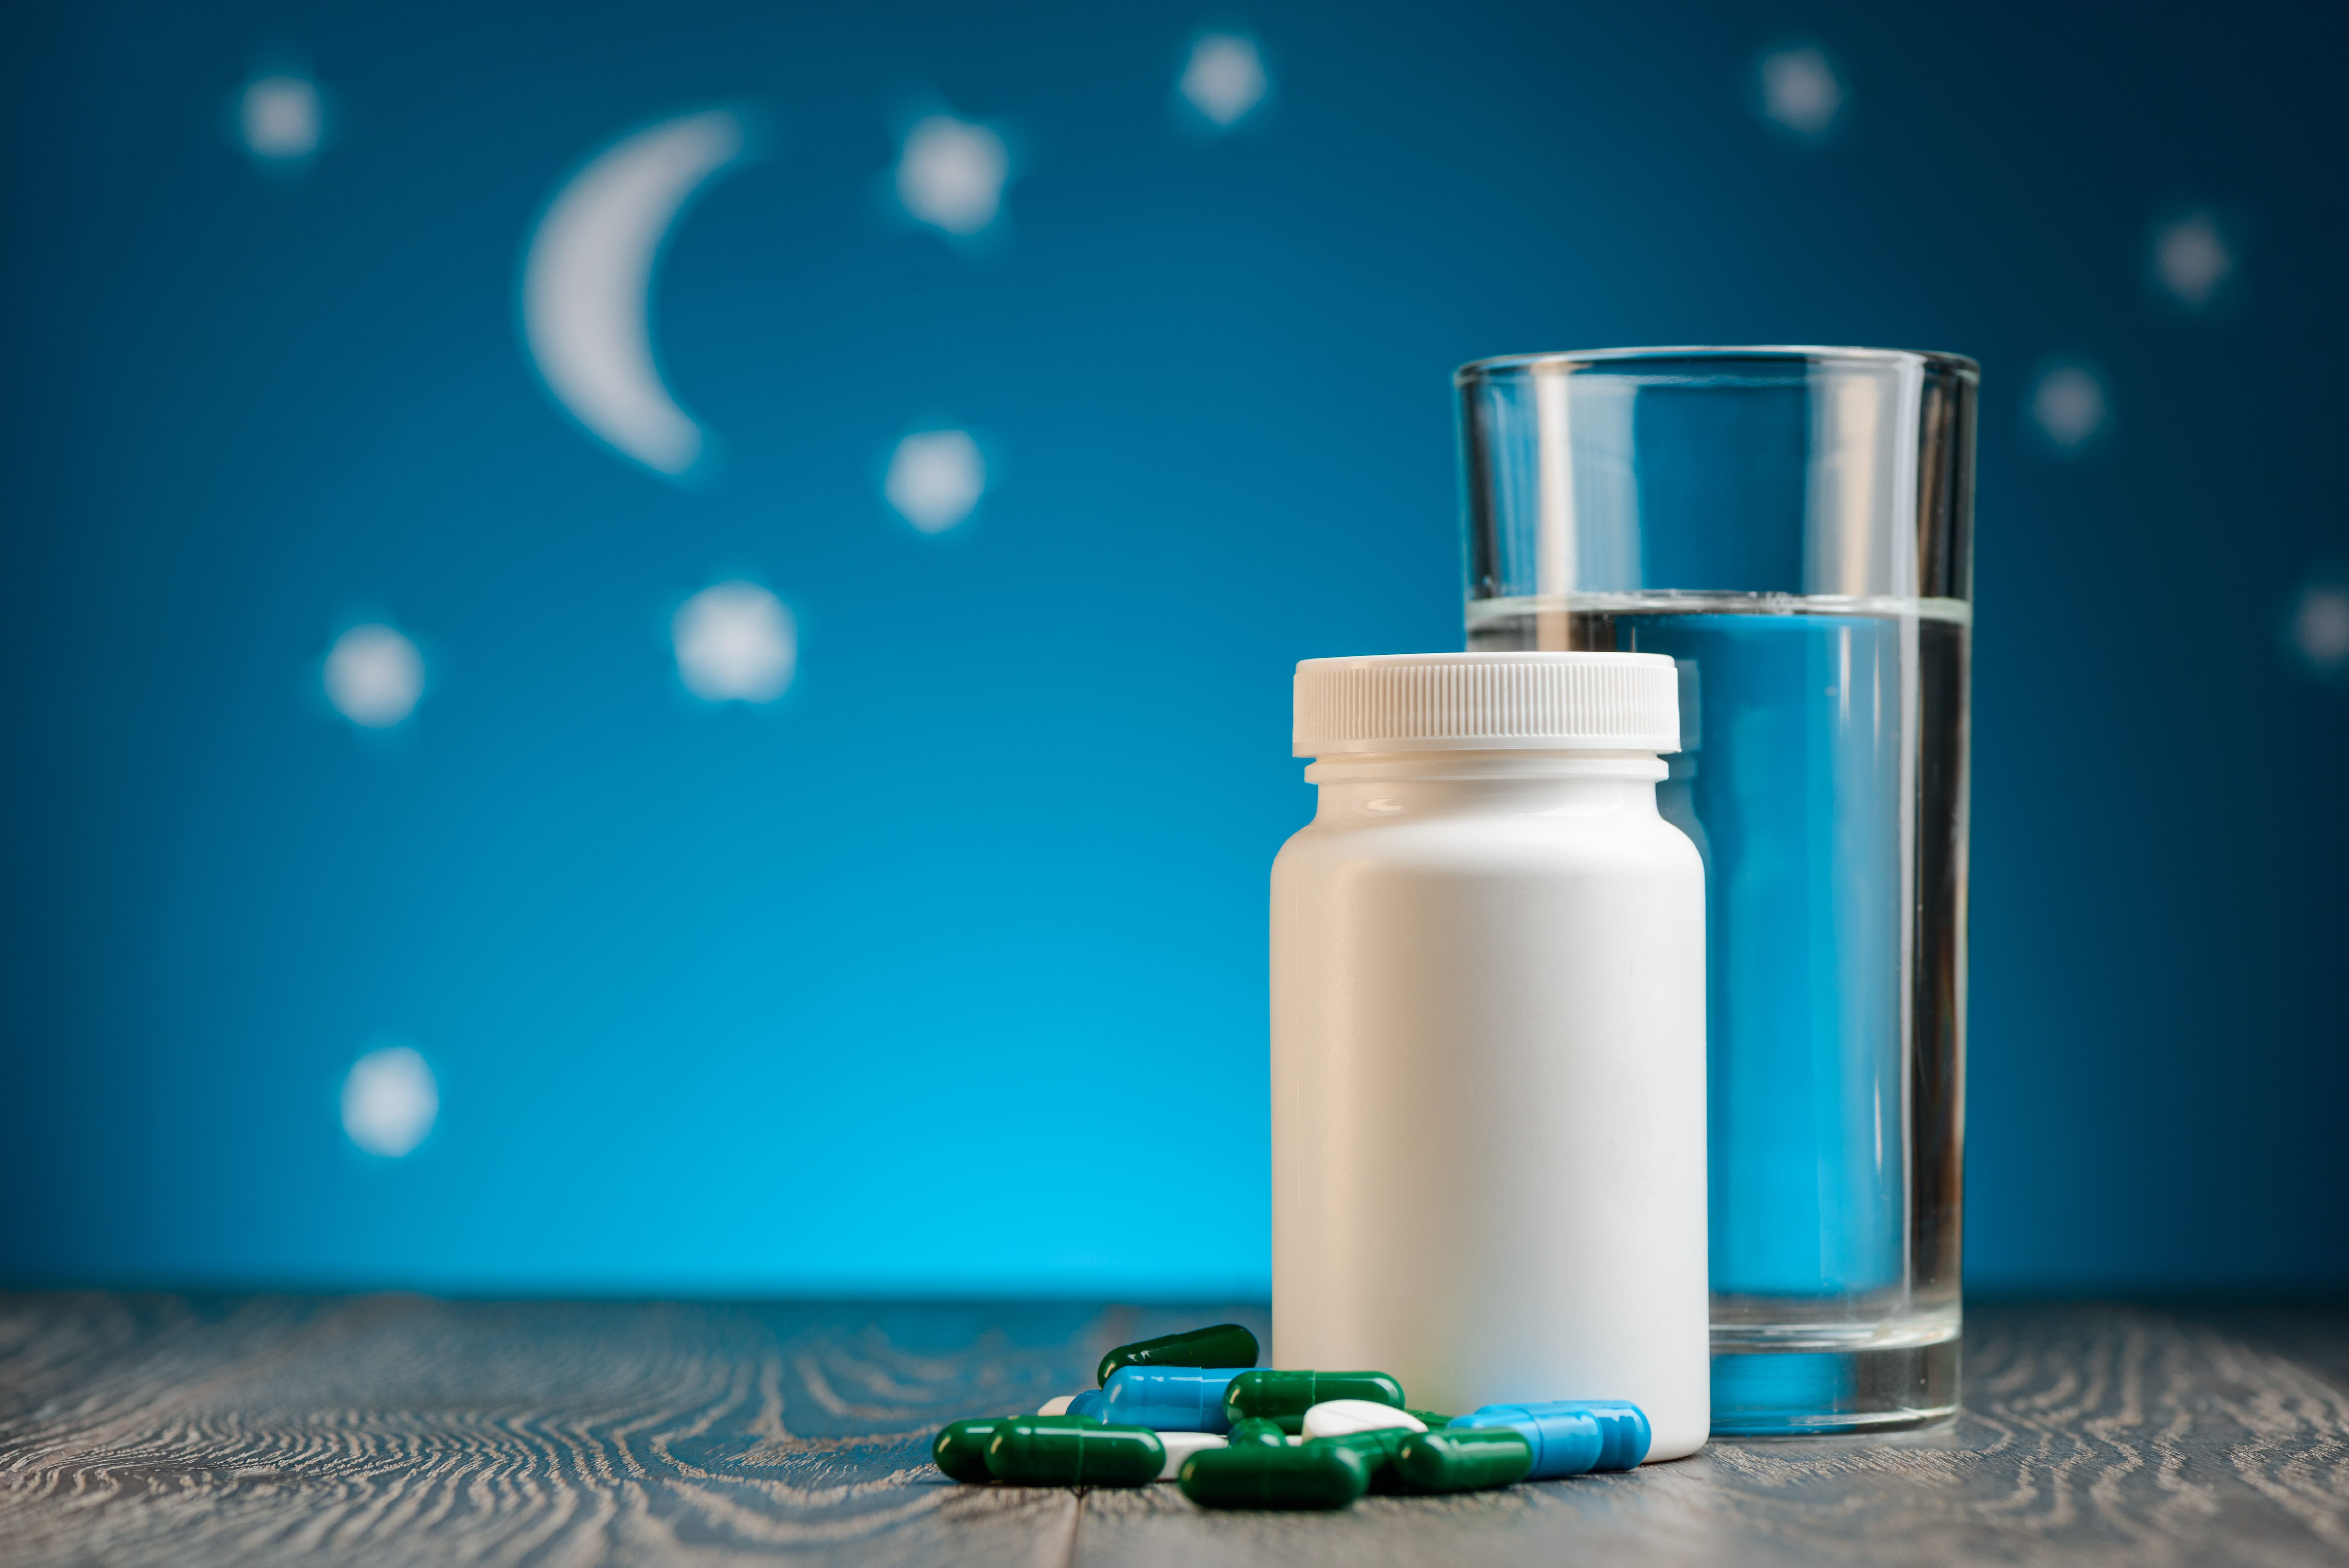 A white tablet container with a scattering of sleep supplements and a glass of water positioned next to it. The background is a child-like night time image featuring stars and a crescent moon against a deep teal-blue background.